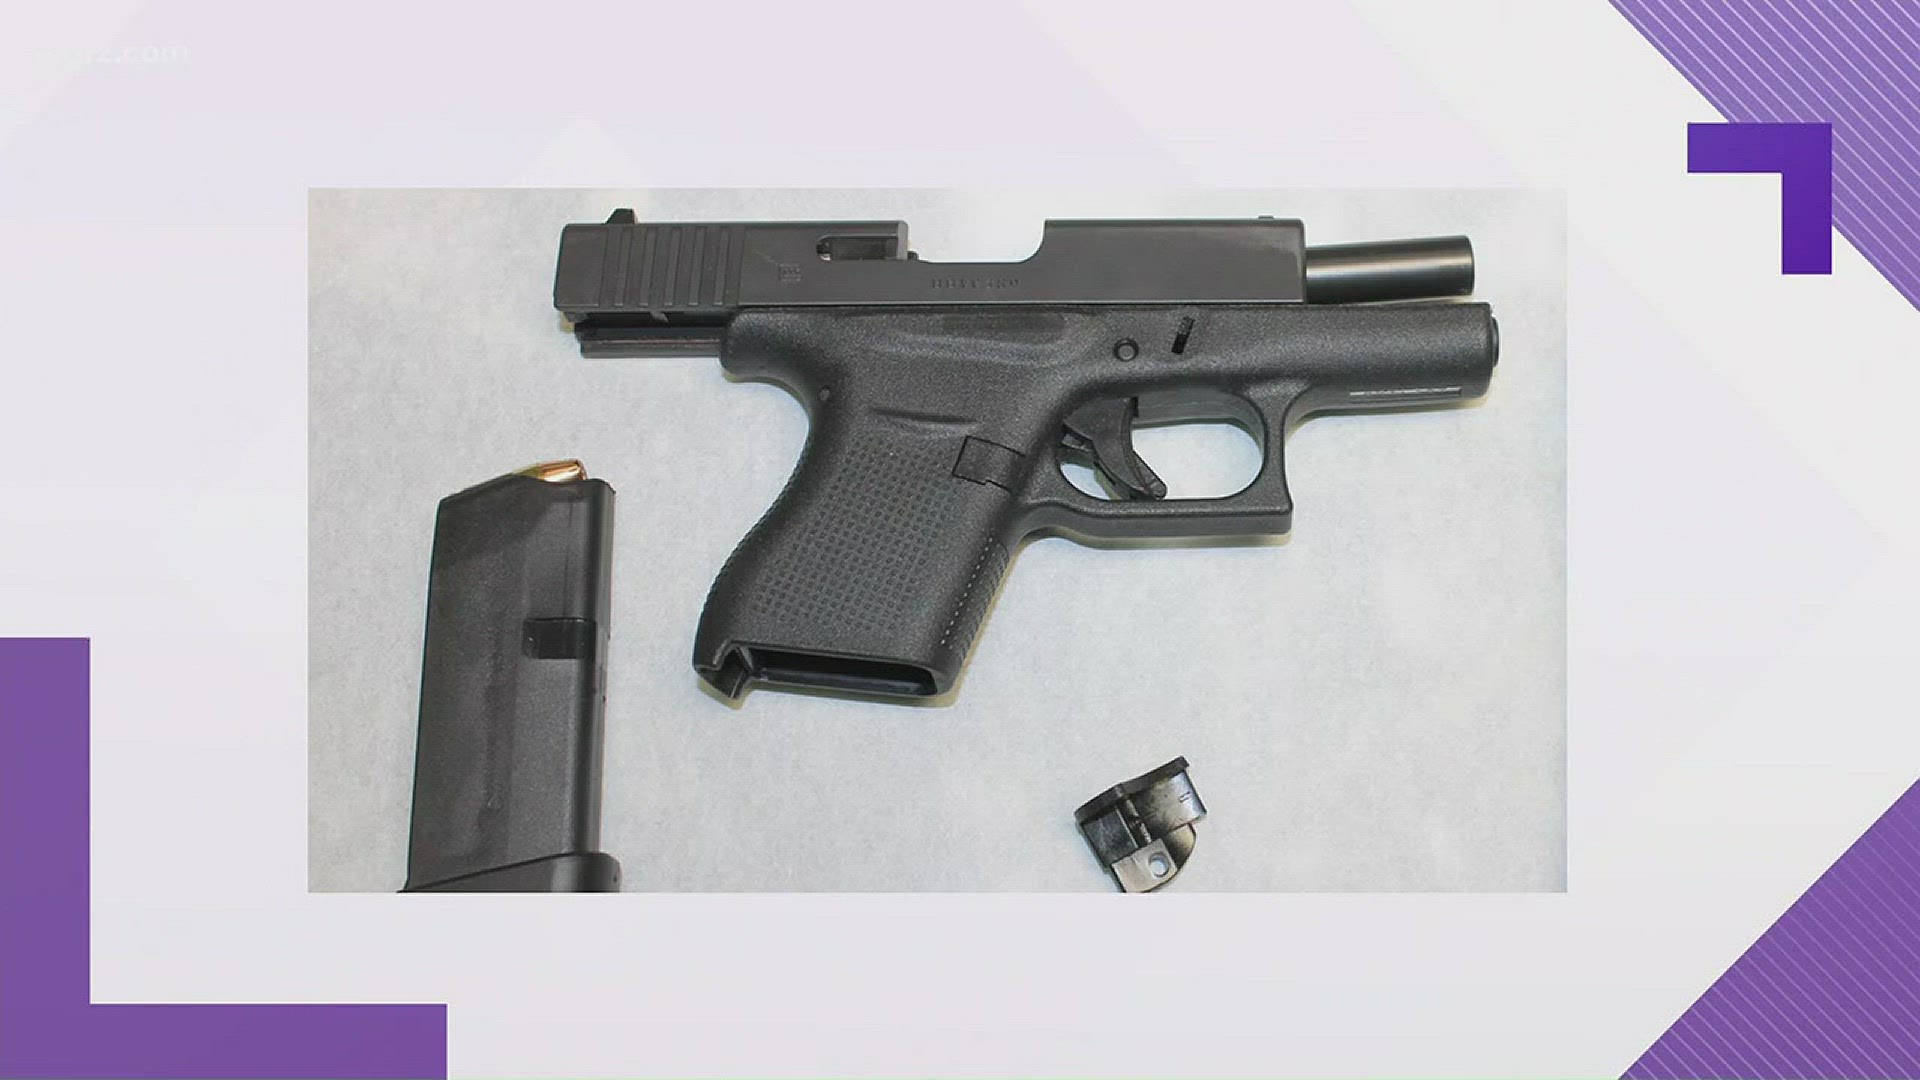 Woman Arrested With Loaded Gun At BNIA